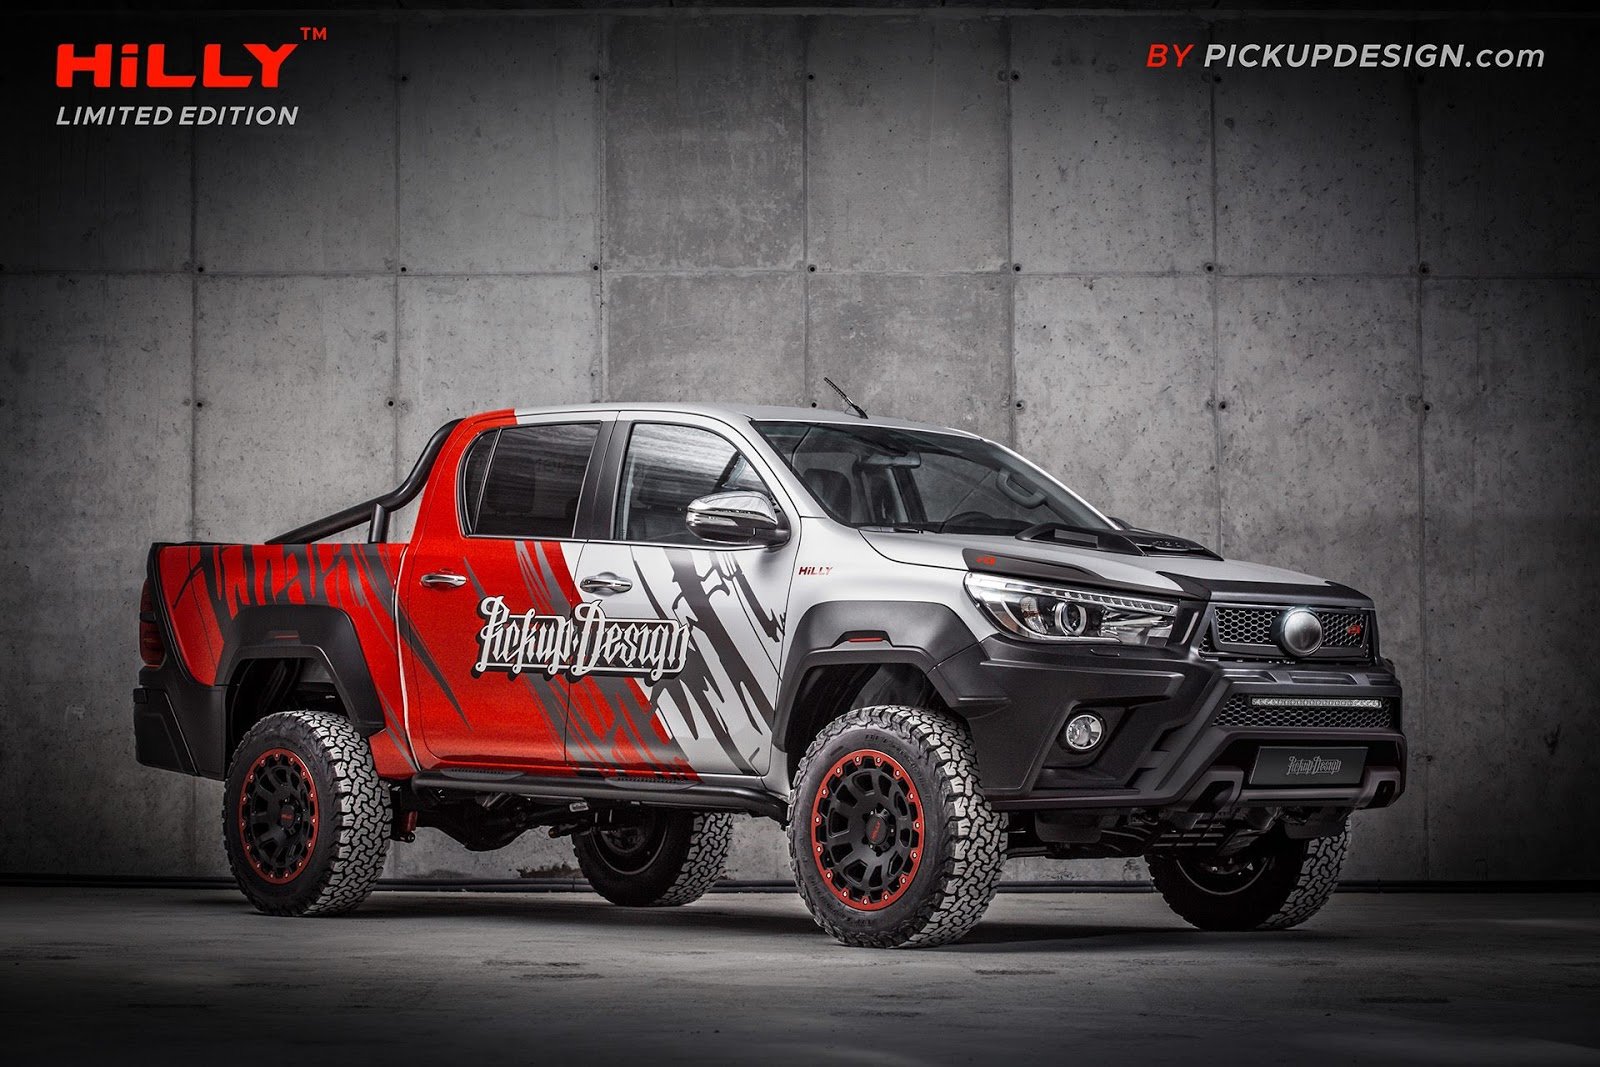 HILLY, Toyota Hilux by Carlex Design, project Pickup Design